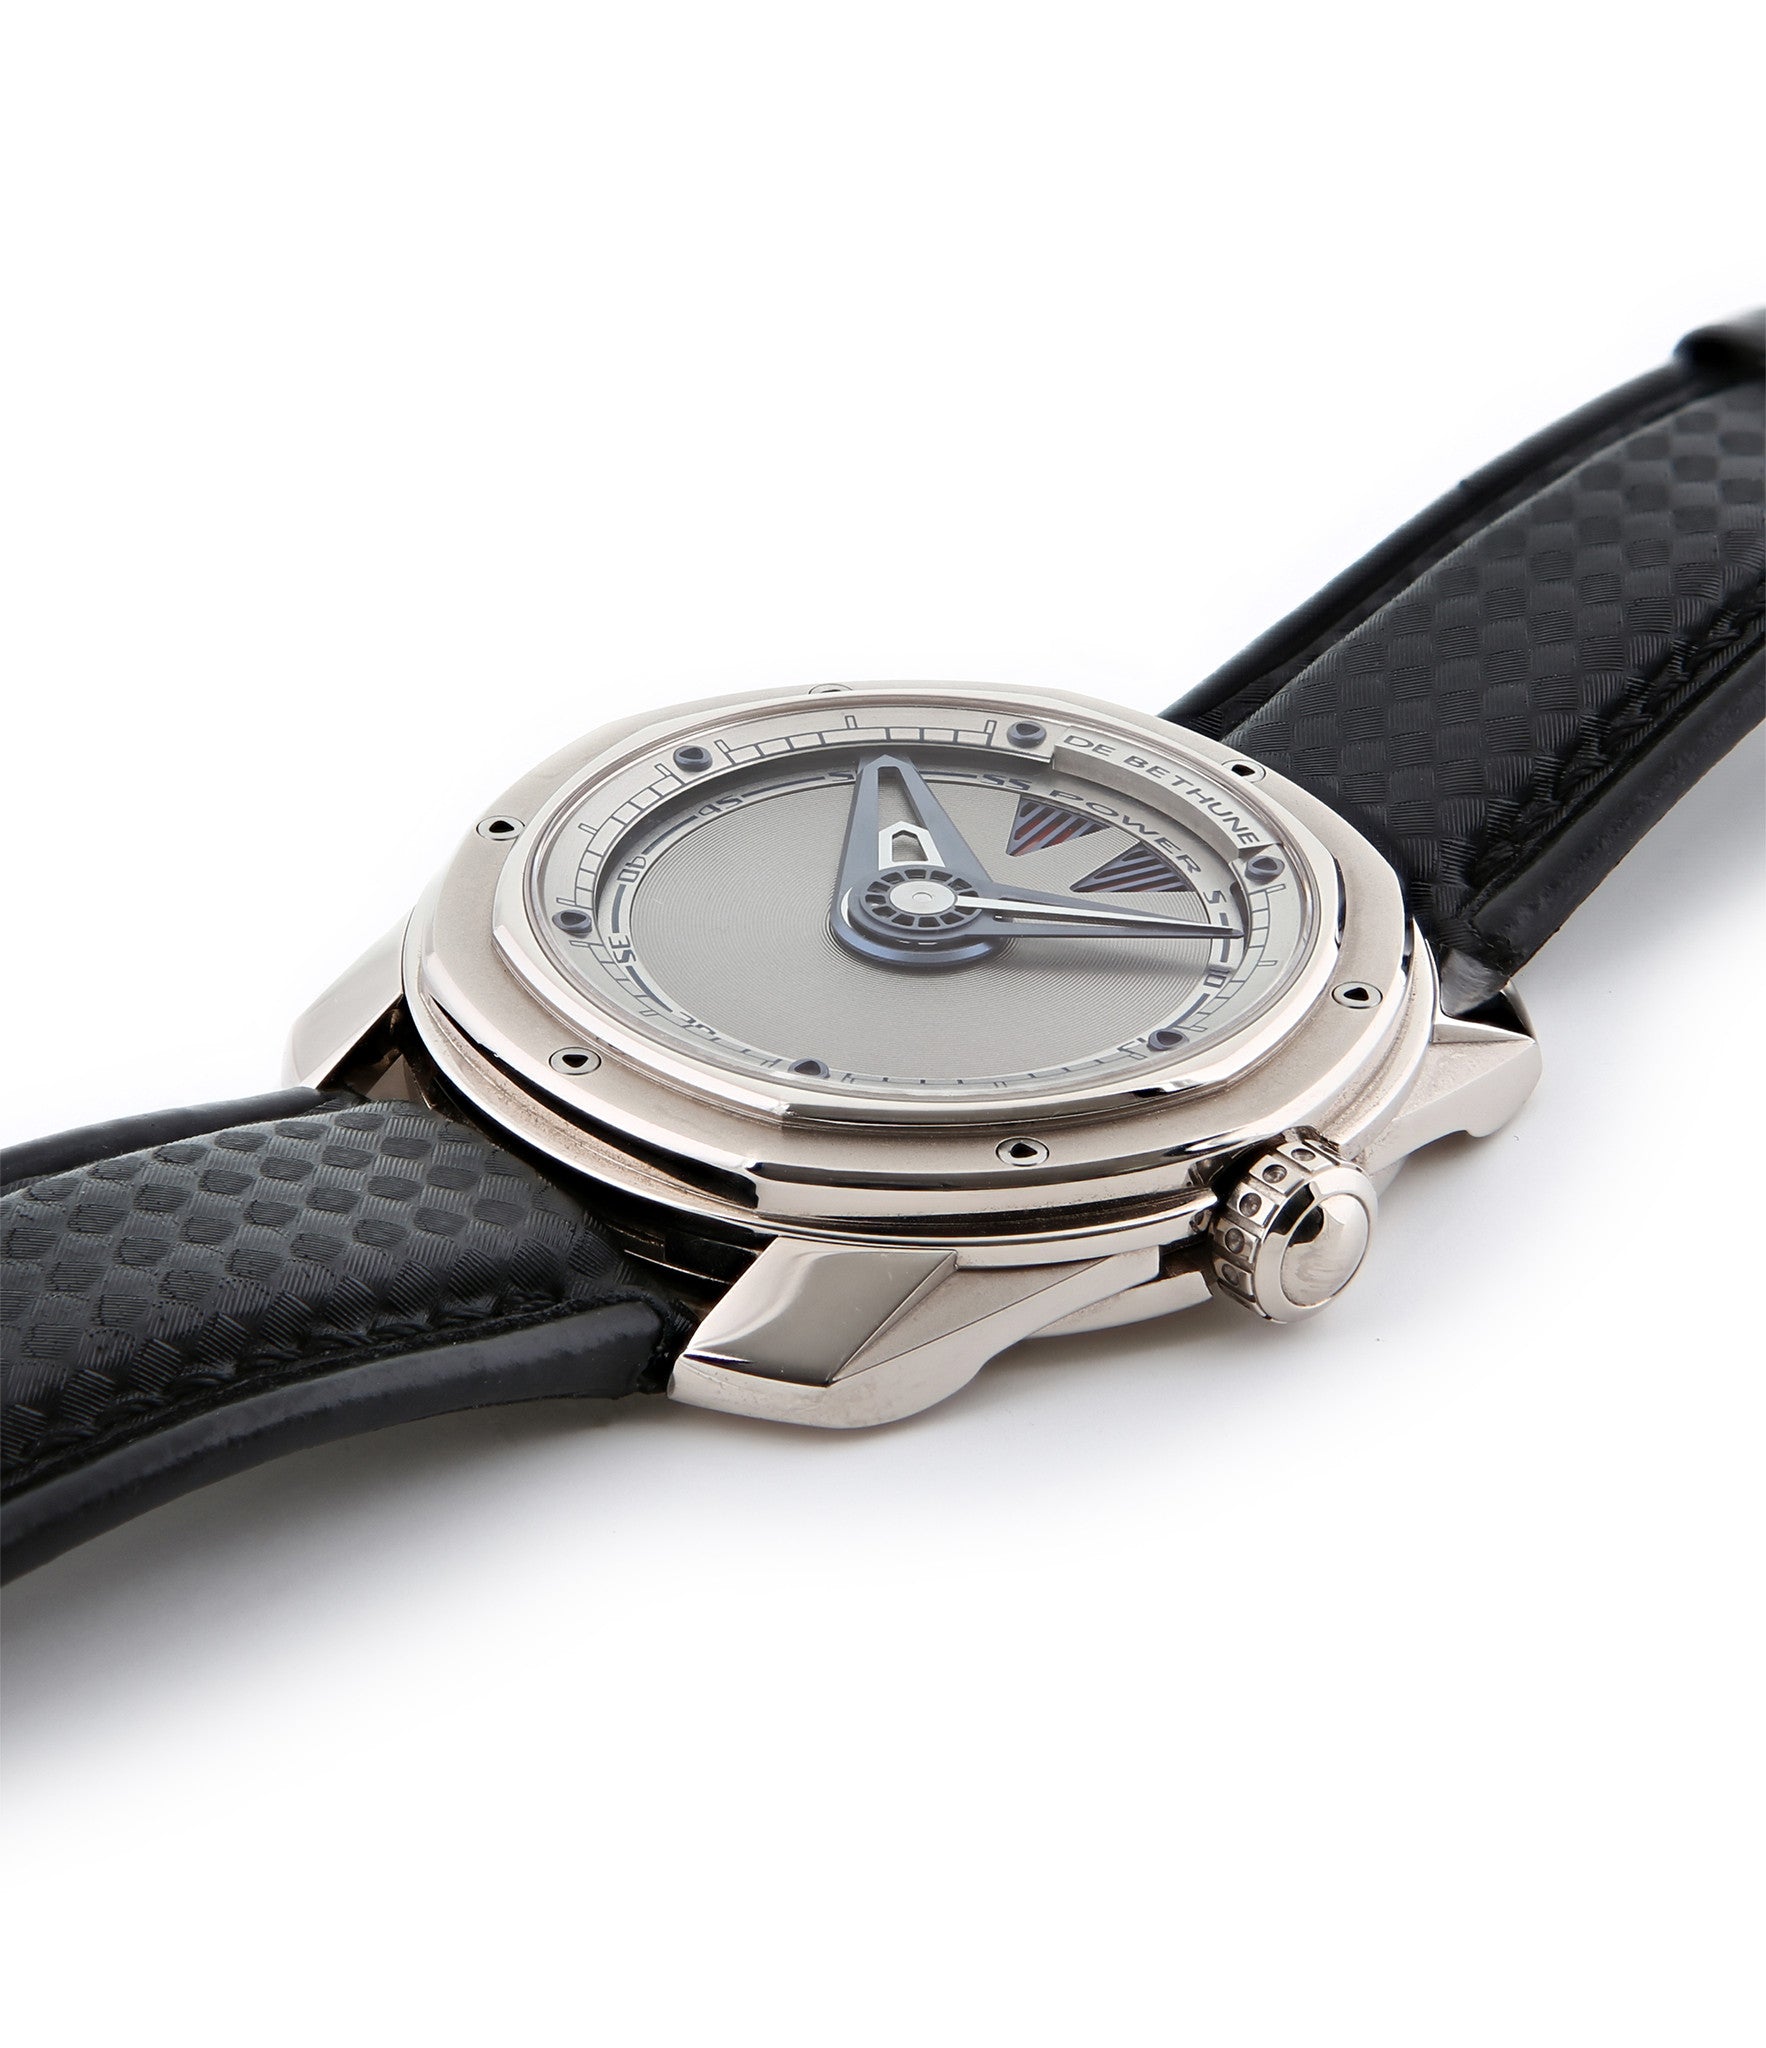 buy De Bethune DB22 power pre-owned watch online in white gold with power reserve from Swiss independent watchmaker  with authenticity guaranteed